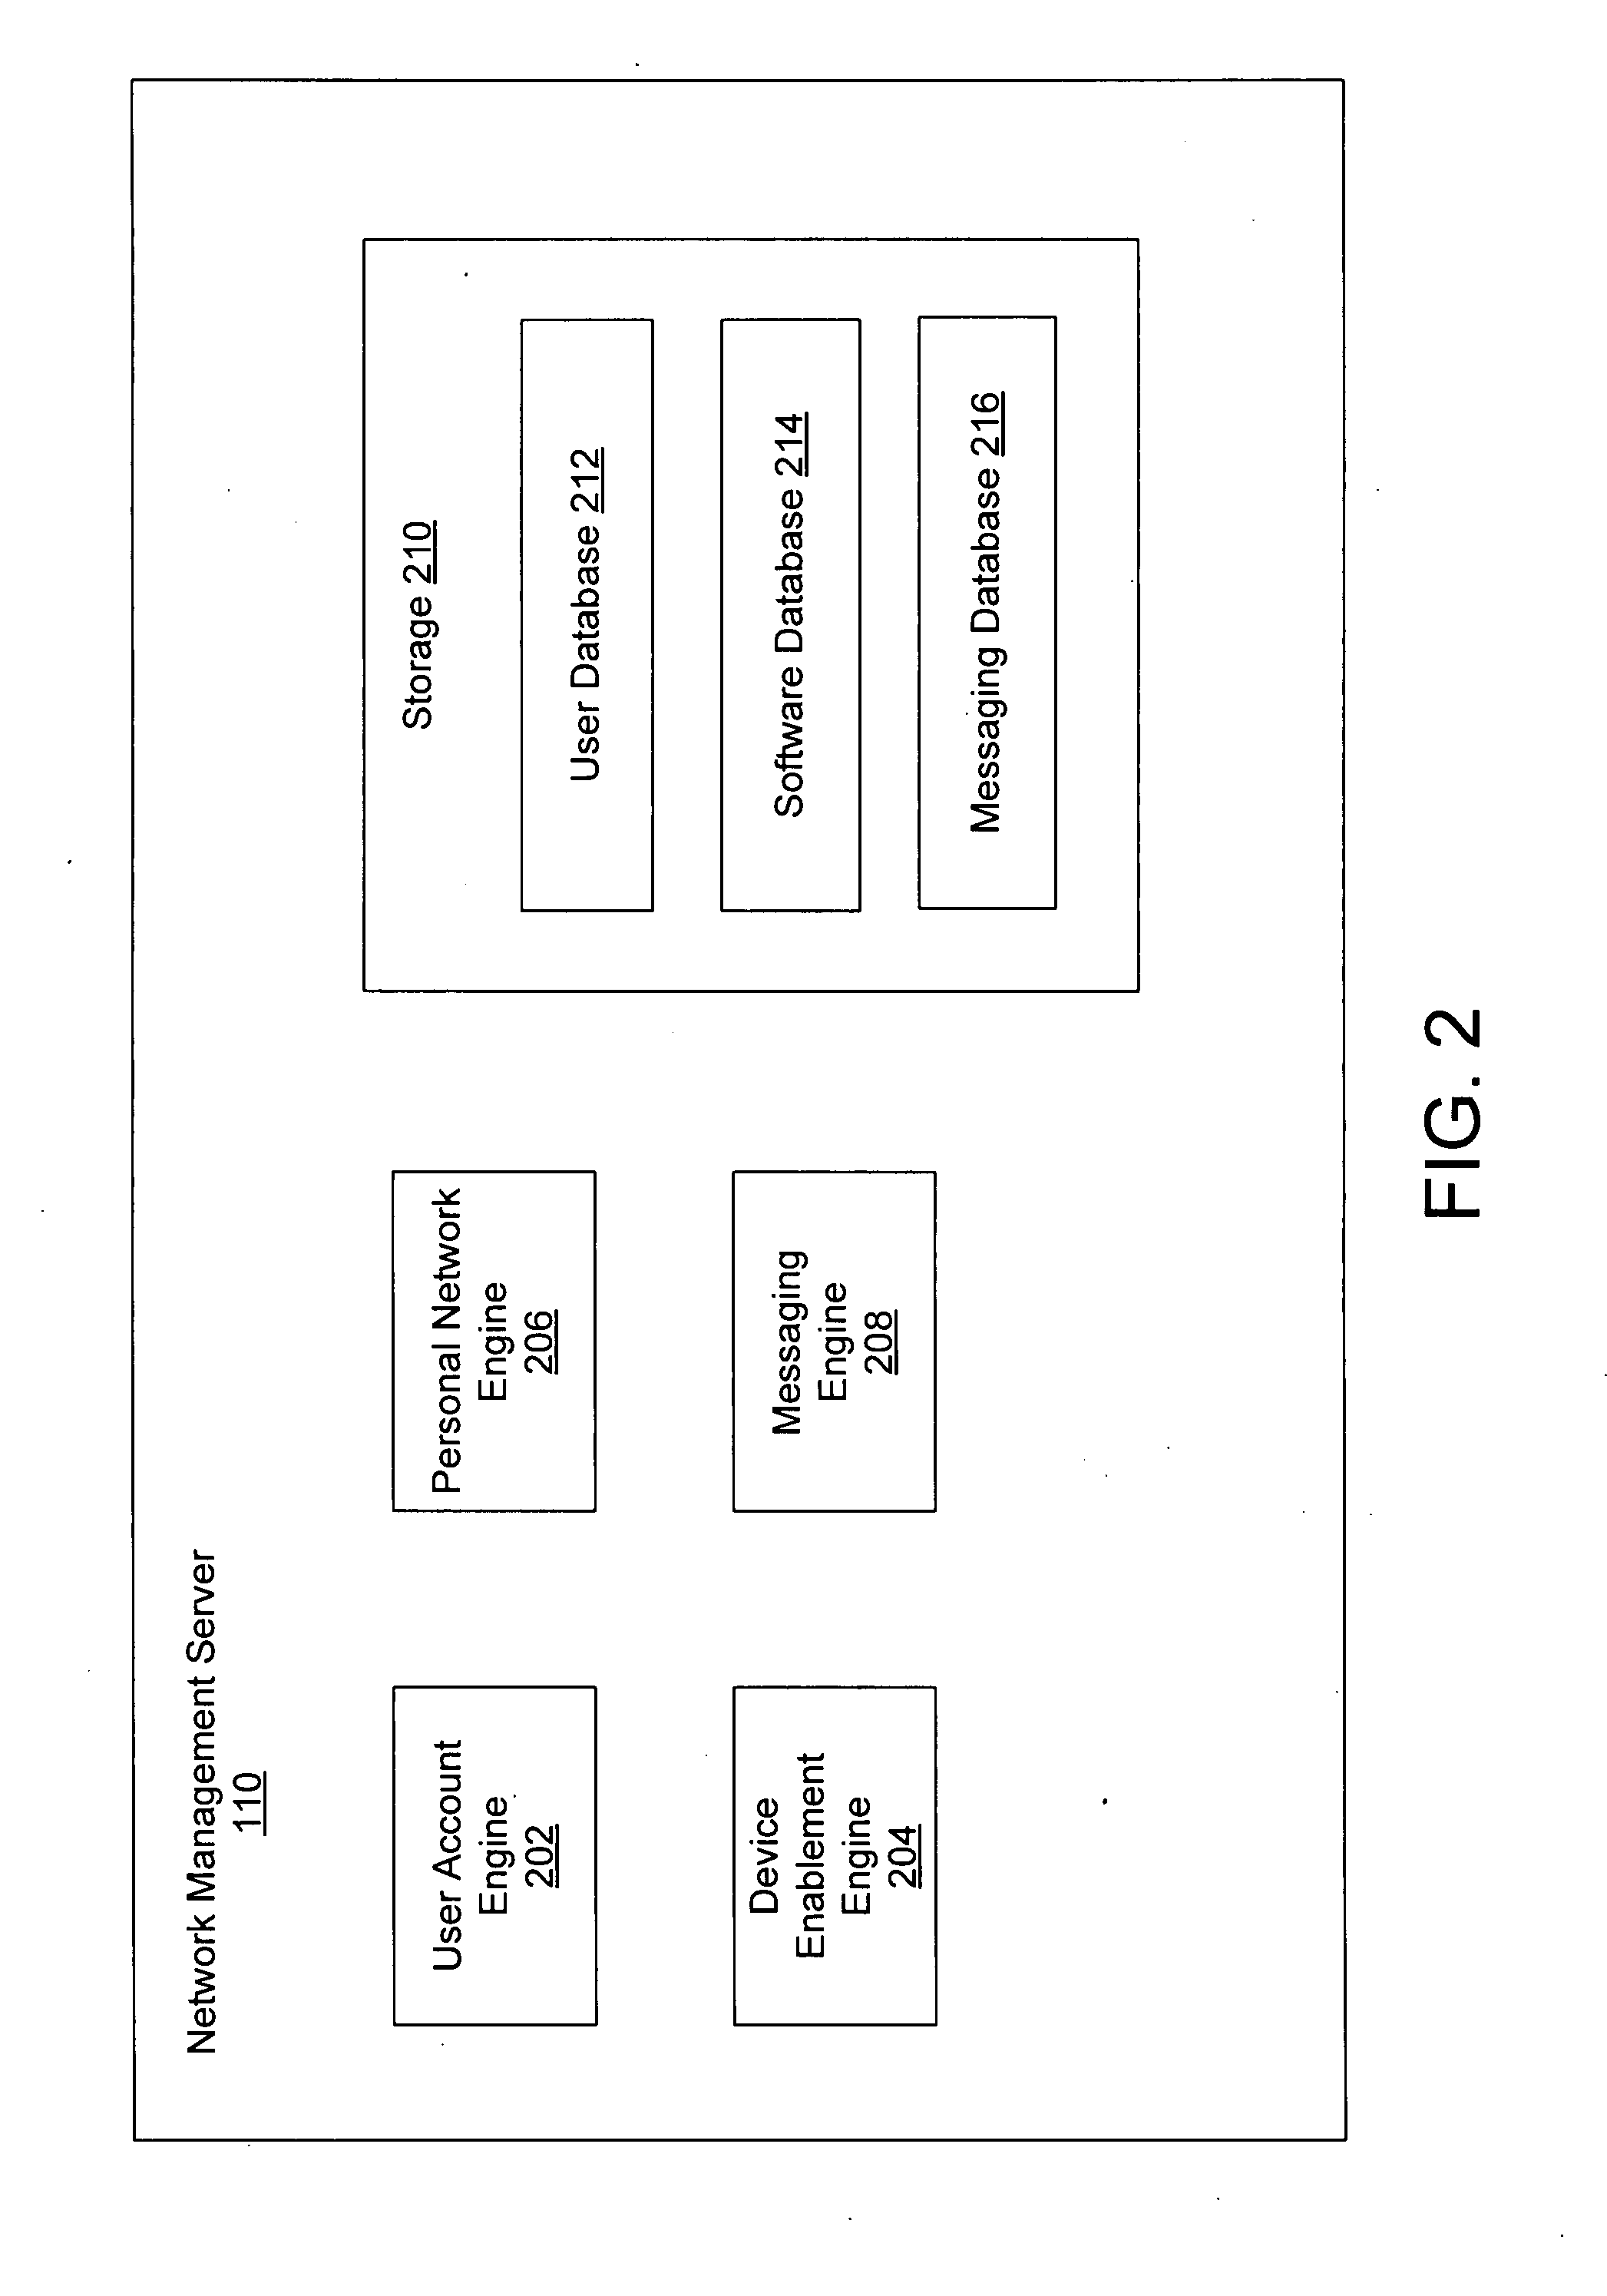 System and method for enabling wireless social networking